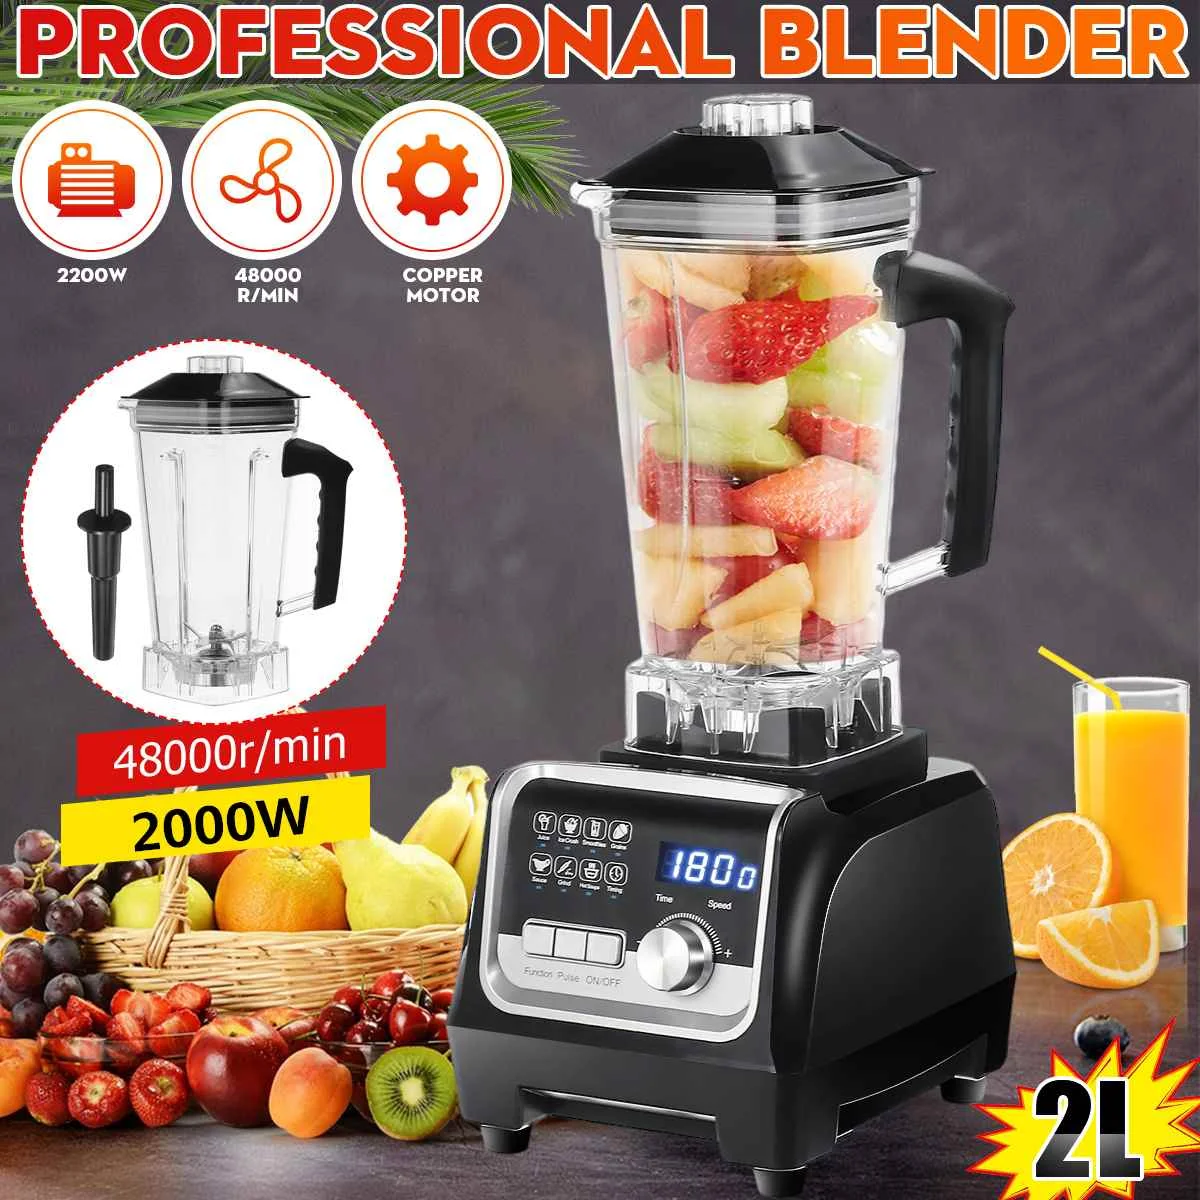 

BPA free 2L 2200W Heavy Duty Commercial Blender Timer Professional Blender Mixer Food Processor Juicer Ice Smoothie Machine